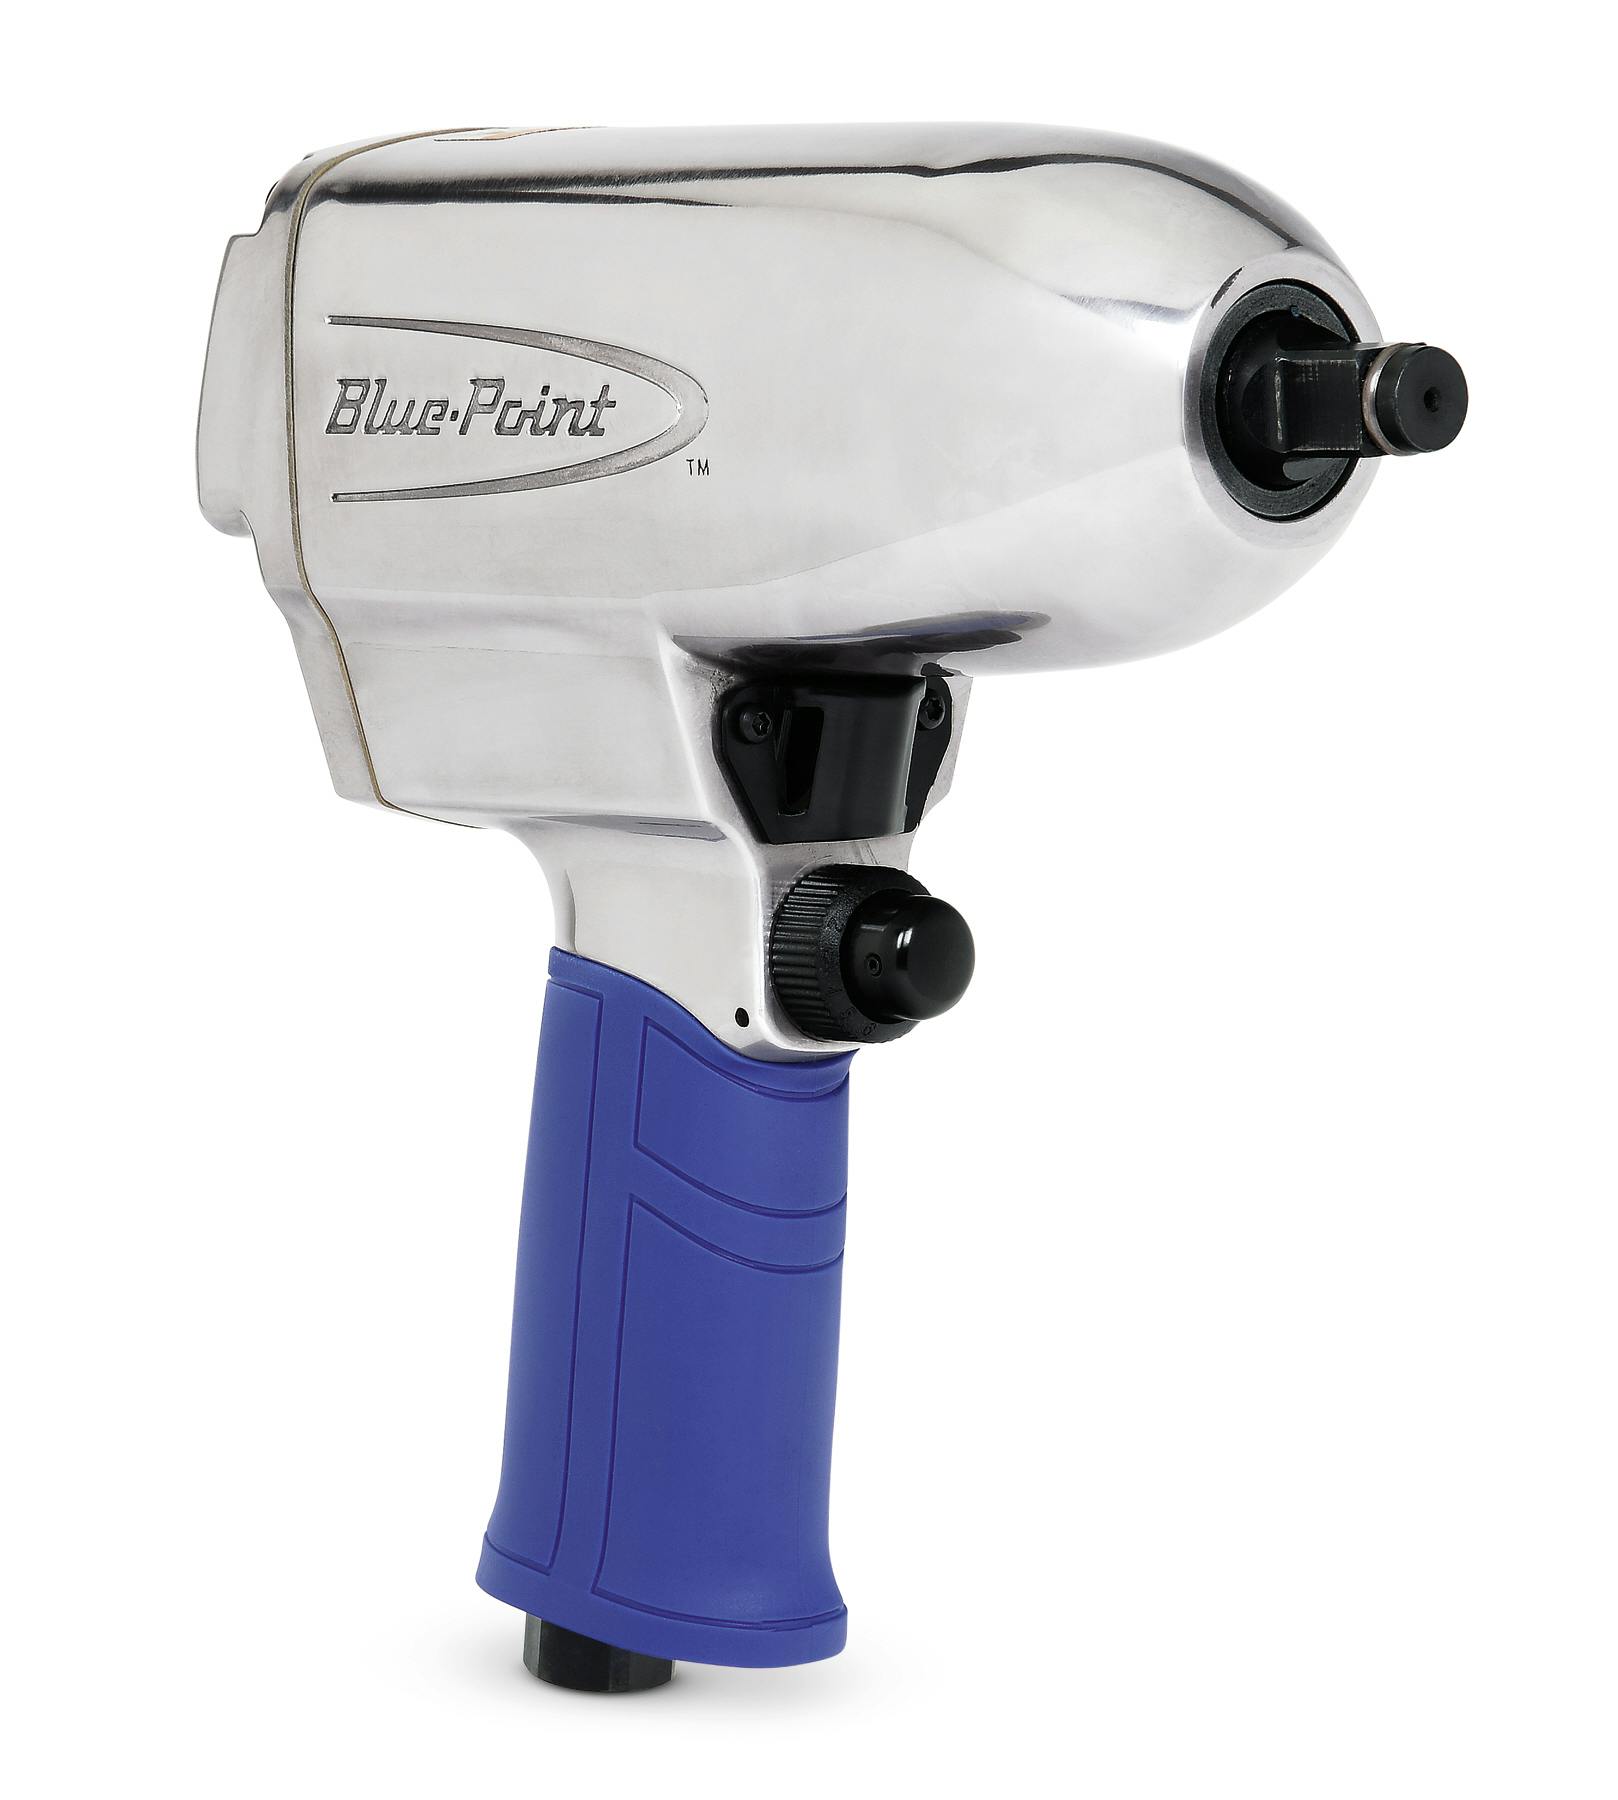 Gun Protective Boot Blue point AT555 1/2" Drive Air Impact Wrench 